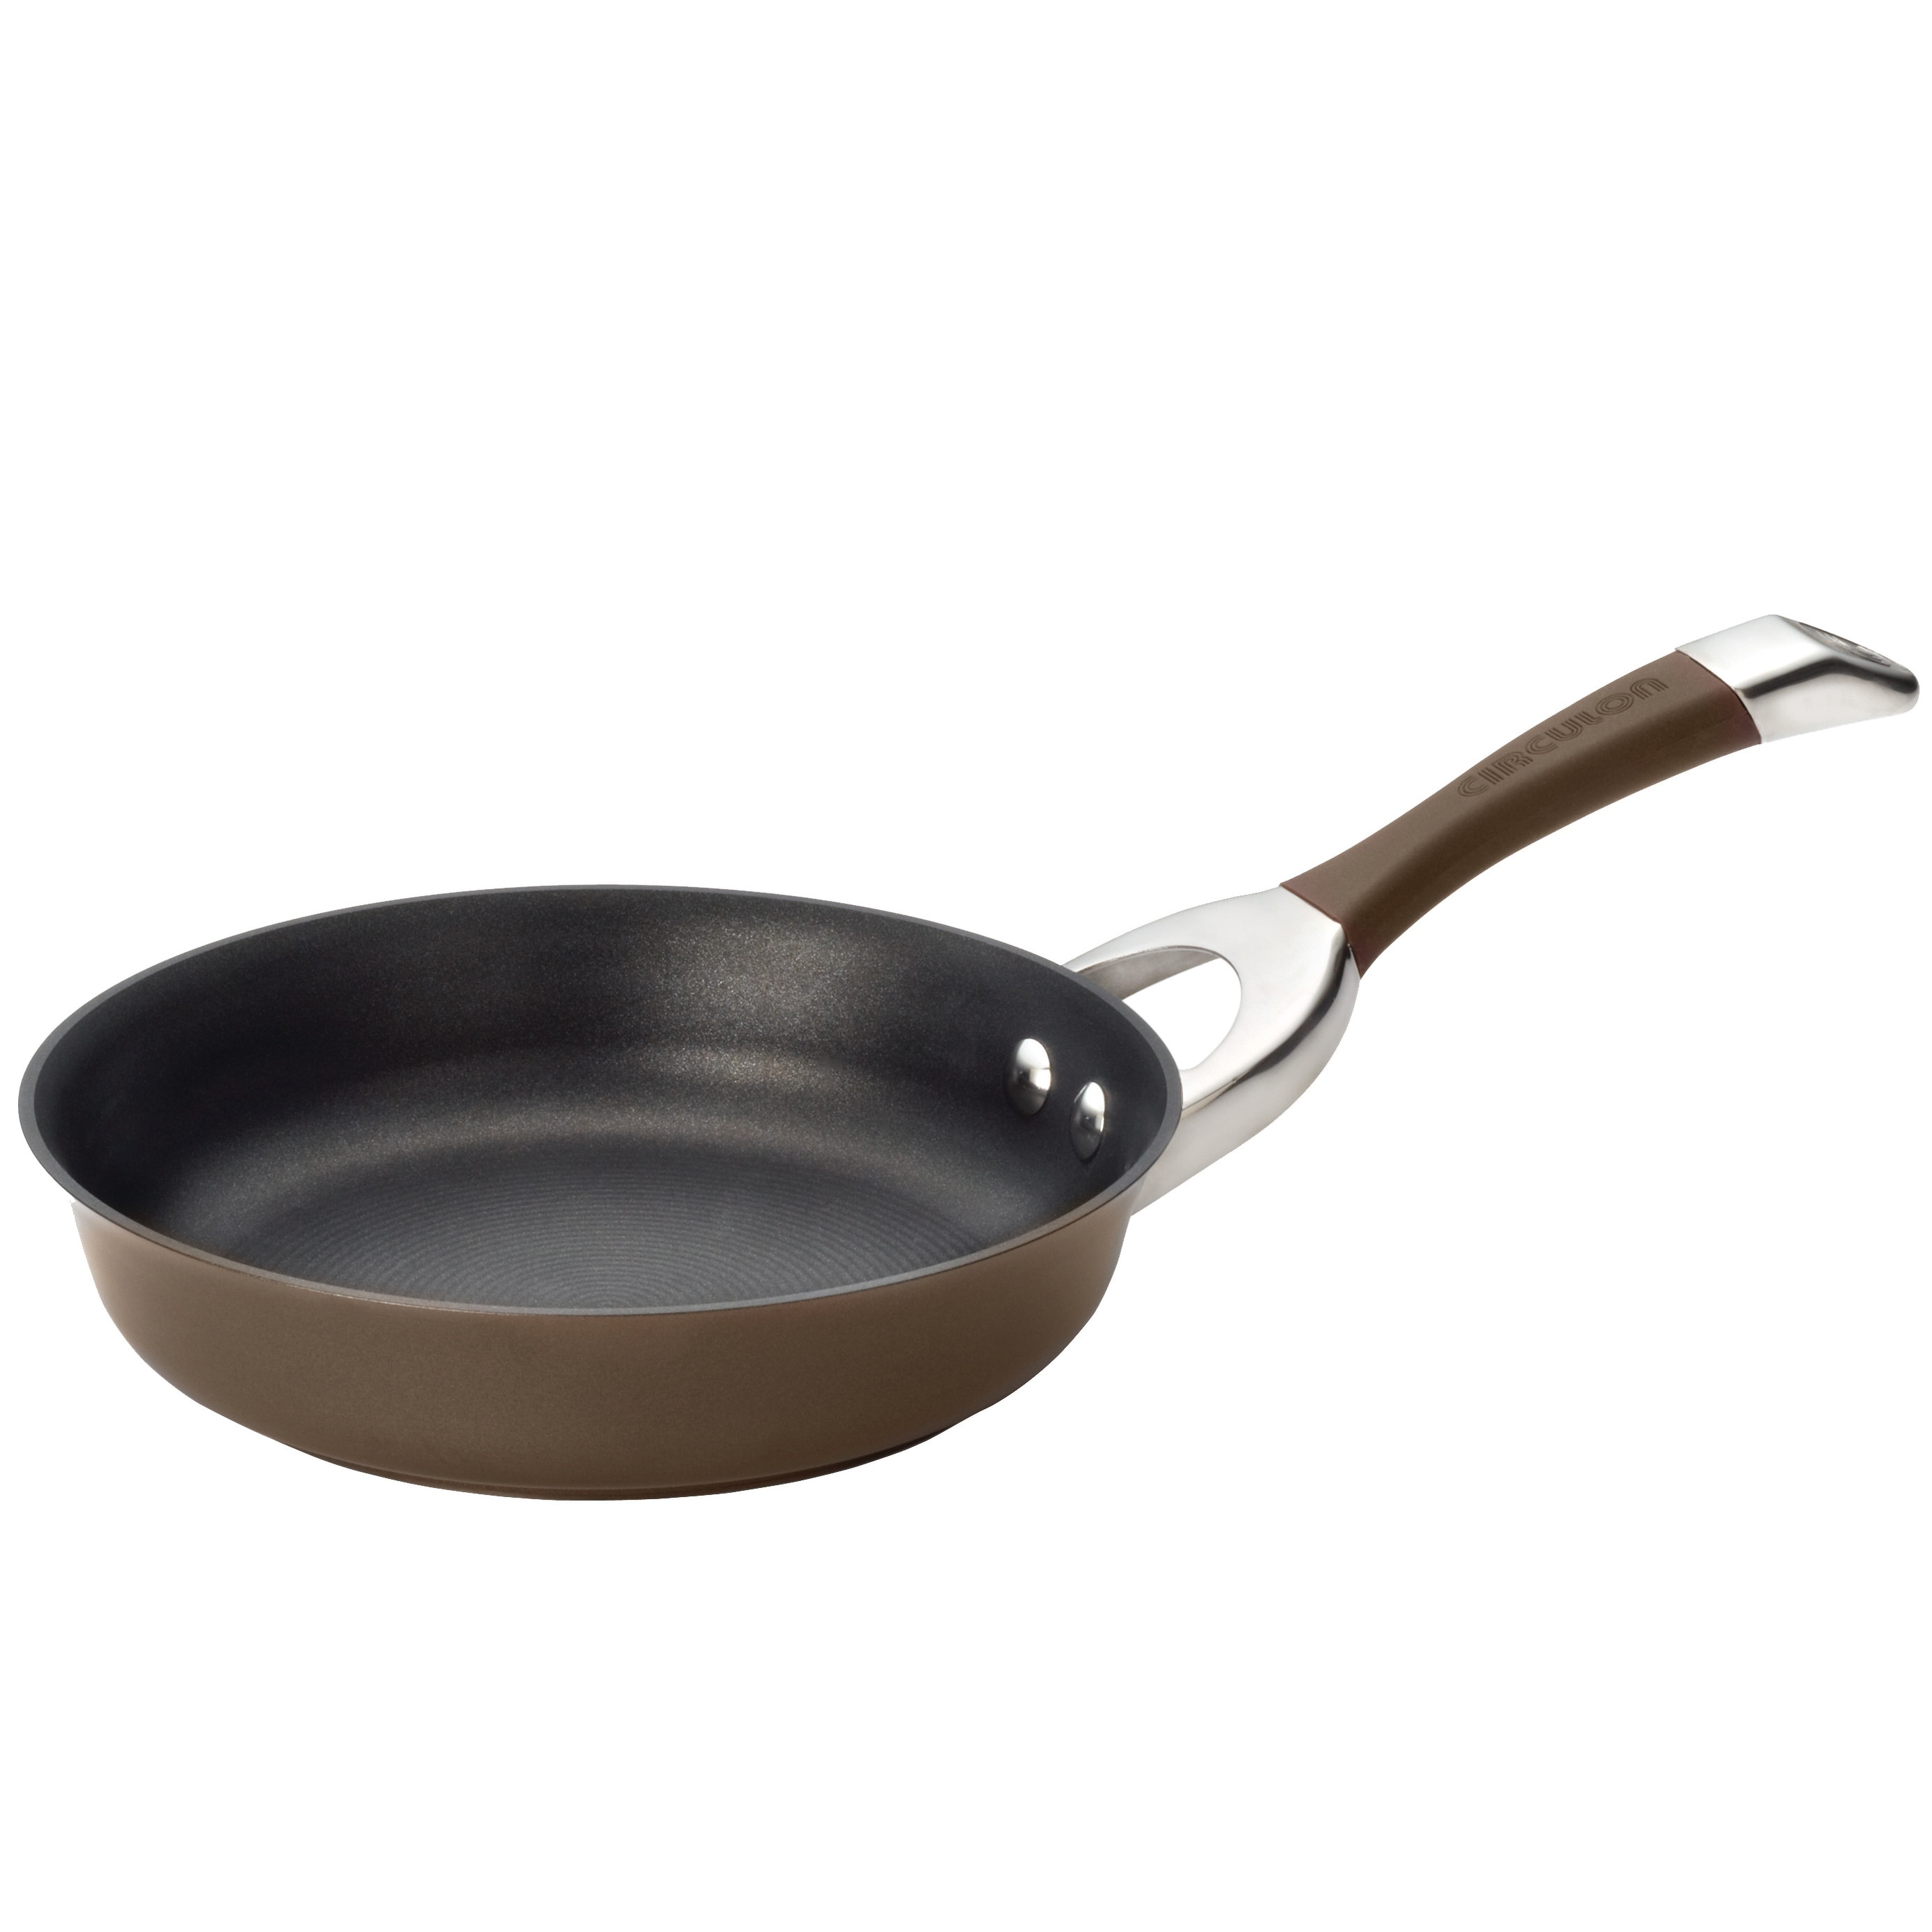 https://ak1.ostkcdn.com/images/products/is/images/direct/4f4a9db7d19a84afcab7414b236765a4caf6bdfa/Circulon-Symmetry-Hard-Anodized-Nonstick-Induction-Frying-Pan%2C-8.5-Inch%2C-Chocolate.jpg